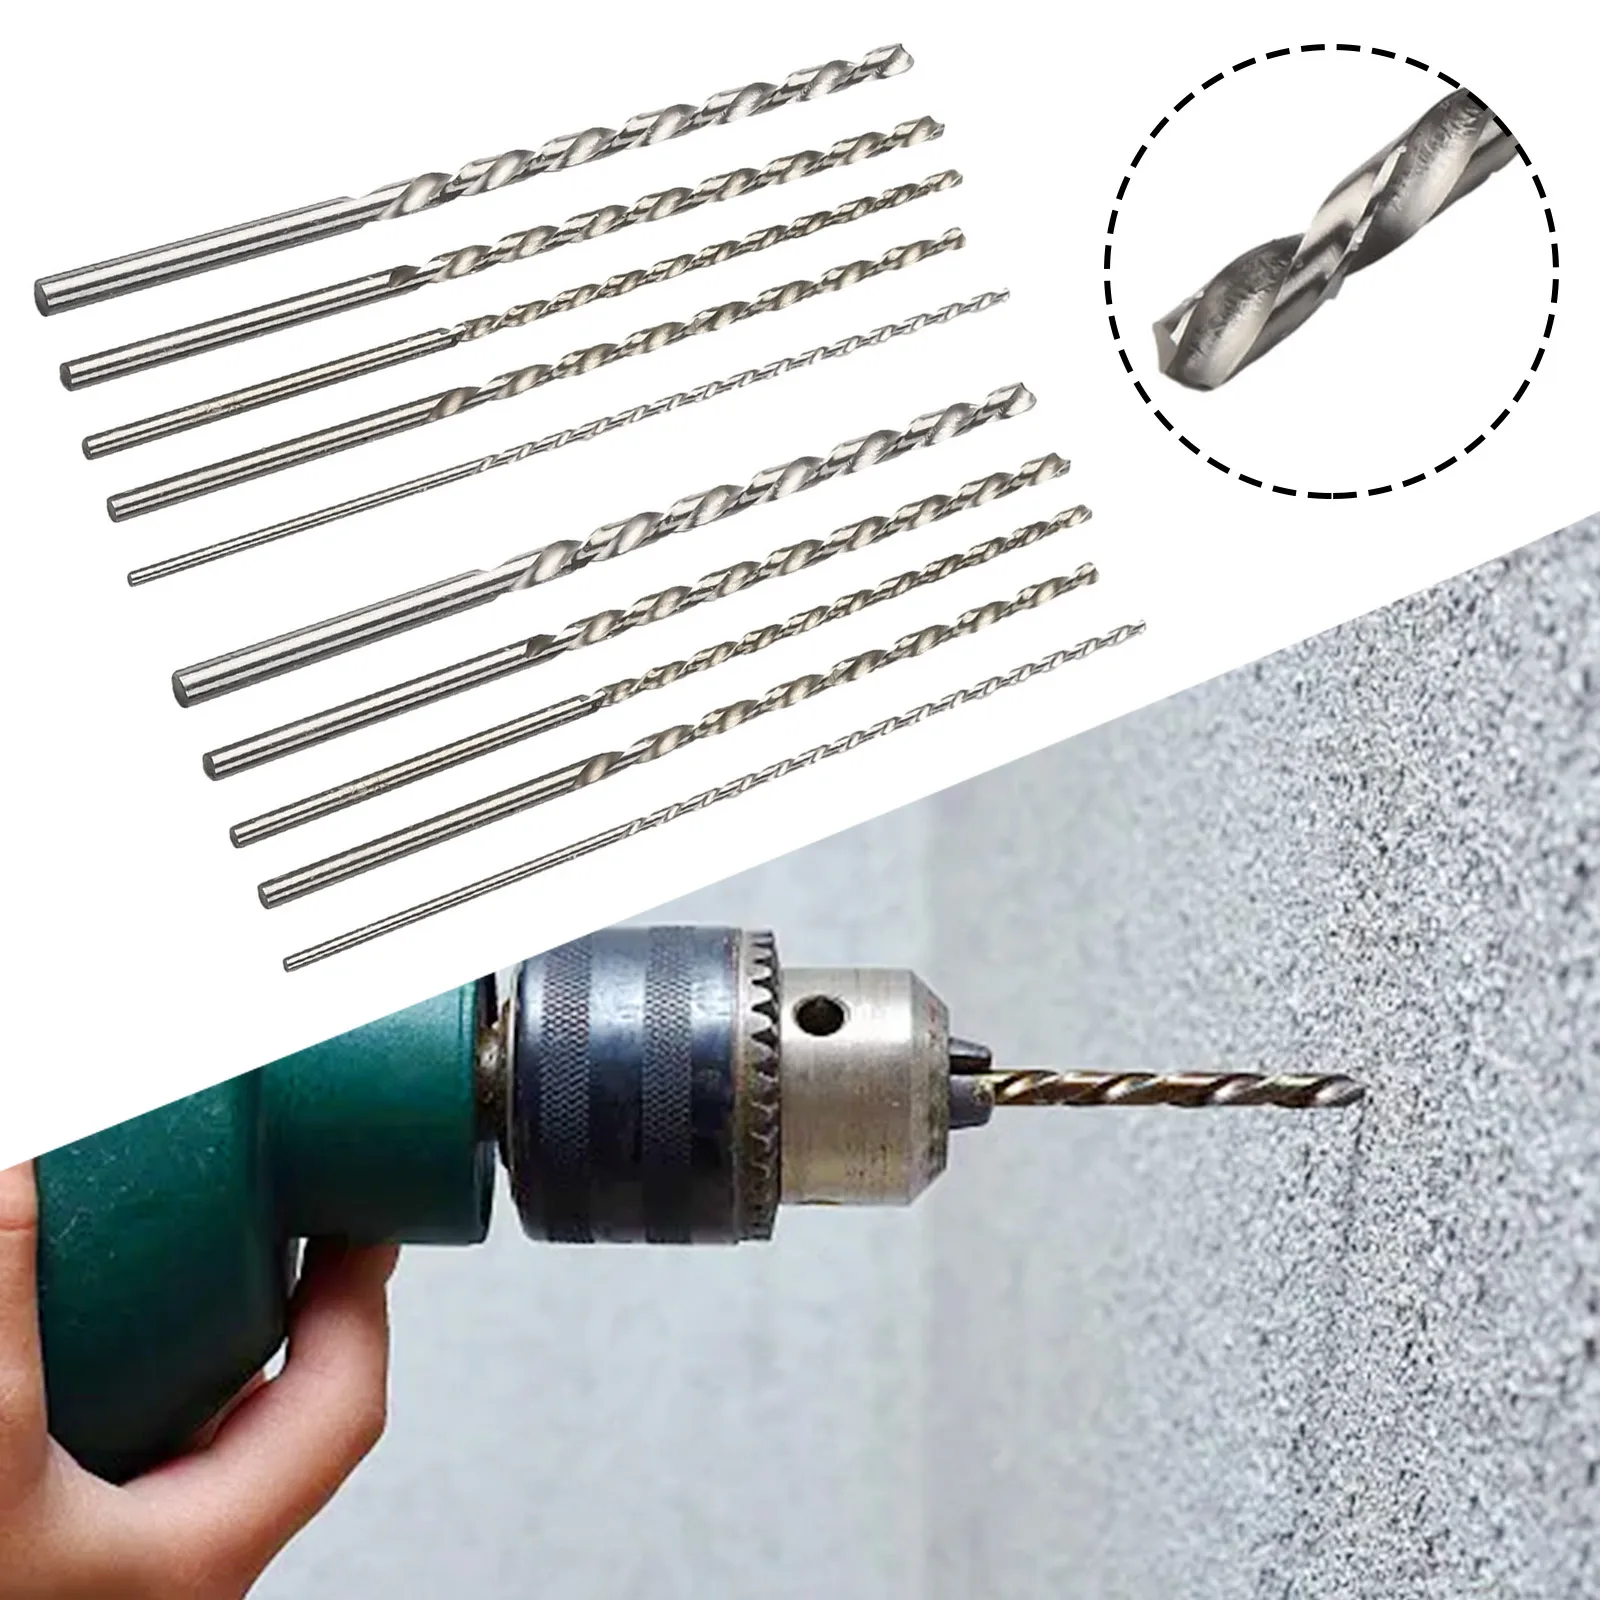 Drilling Machines Drill Bit Electric Drill 4mm 5mm Extra Long High Speed Steel Parts For Wood Aluminum Plastic